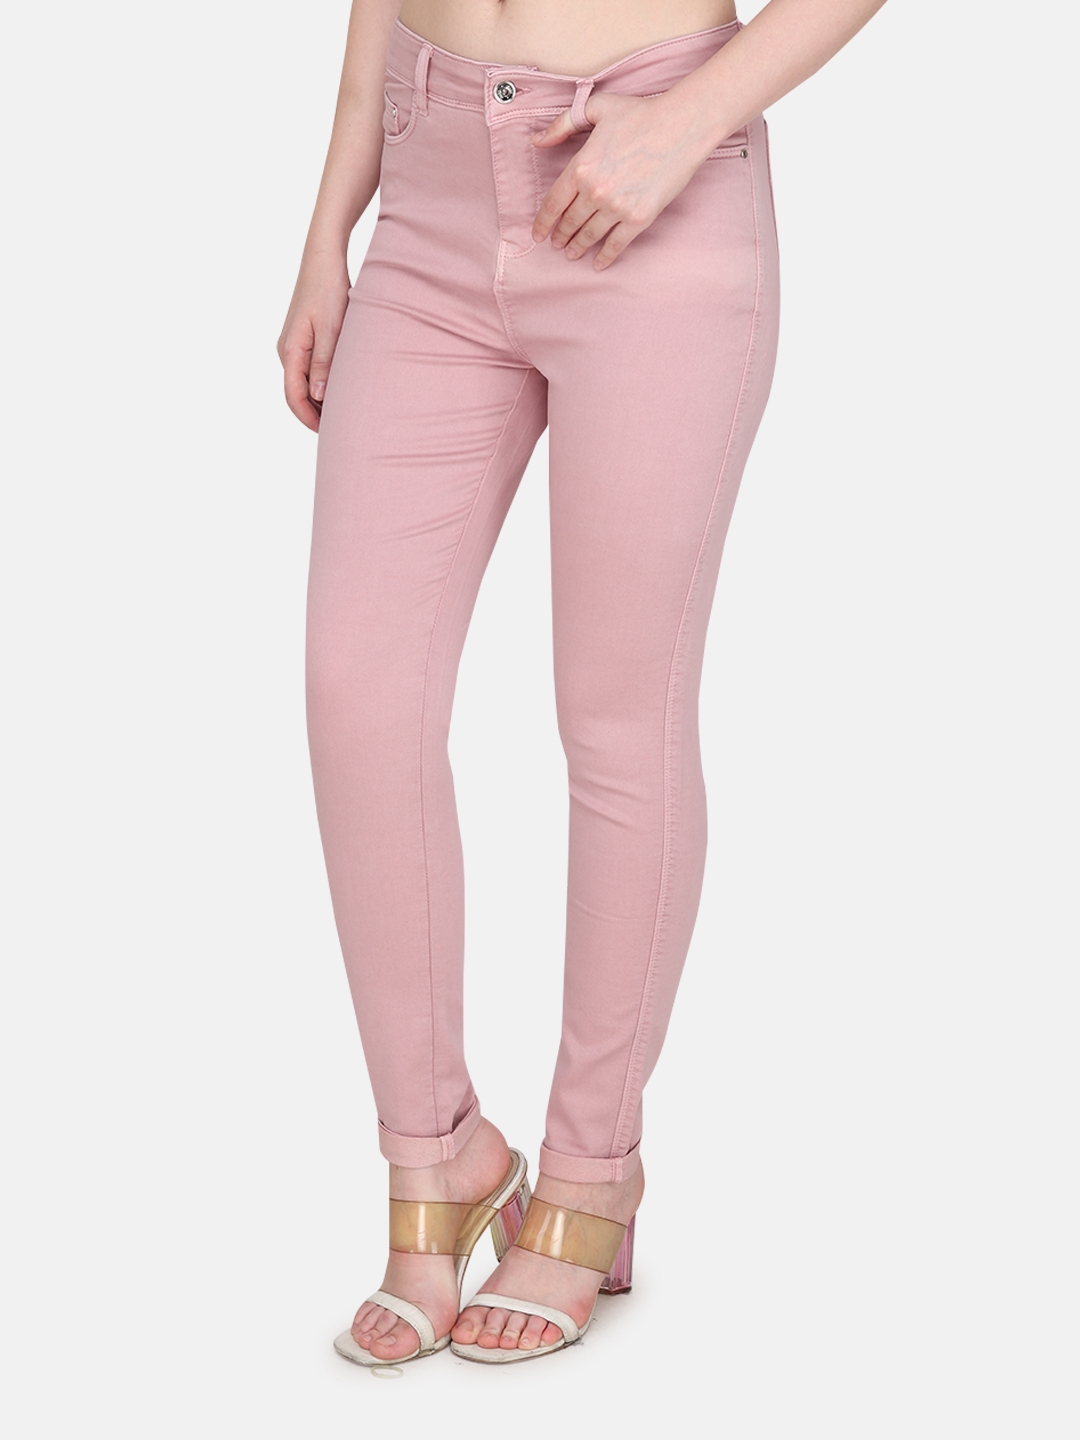 Albion | Albion By CnM Women Pink Denim Stretchable Jeans 1